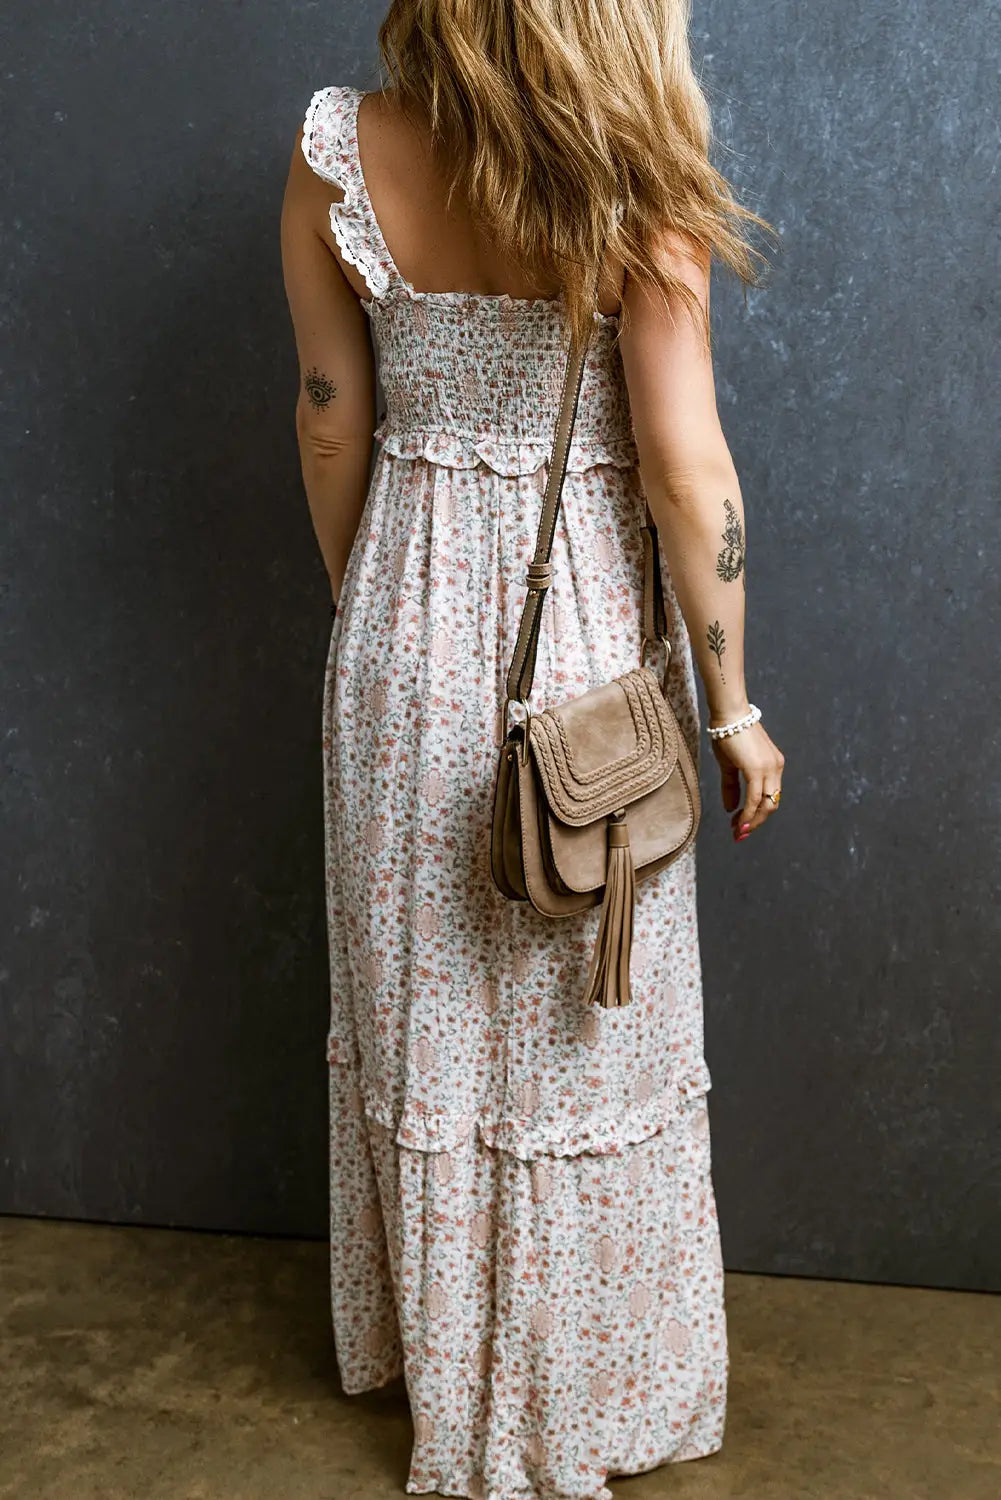 Floral maxi dress - white lace frilly straps shirred - dresses